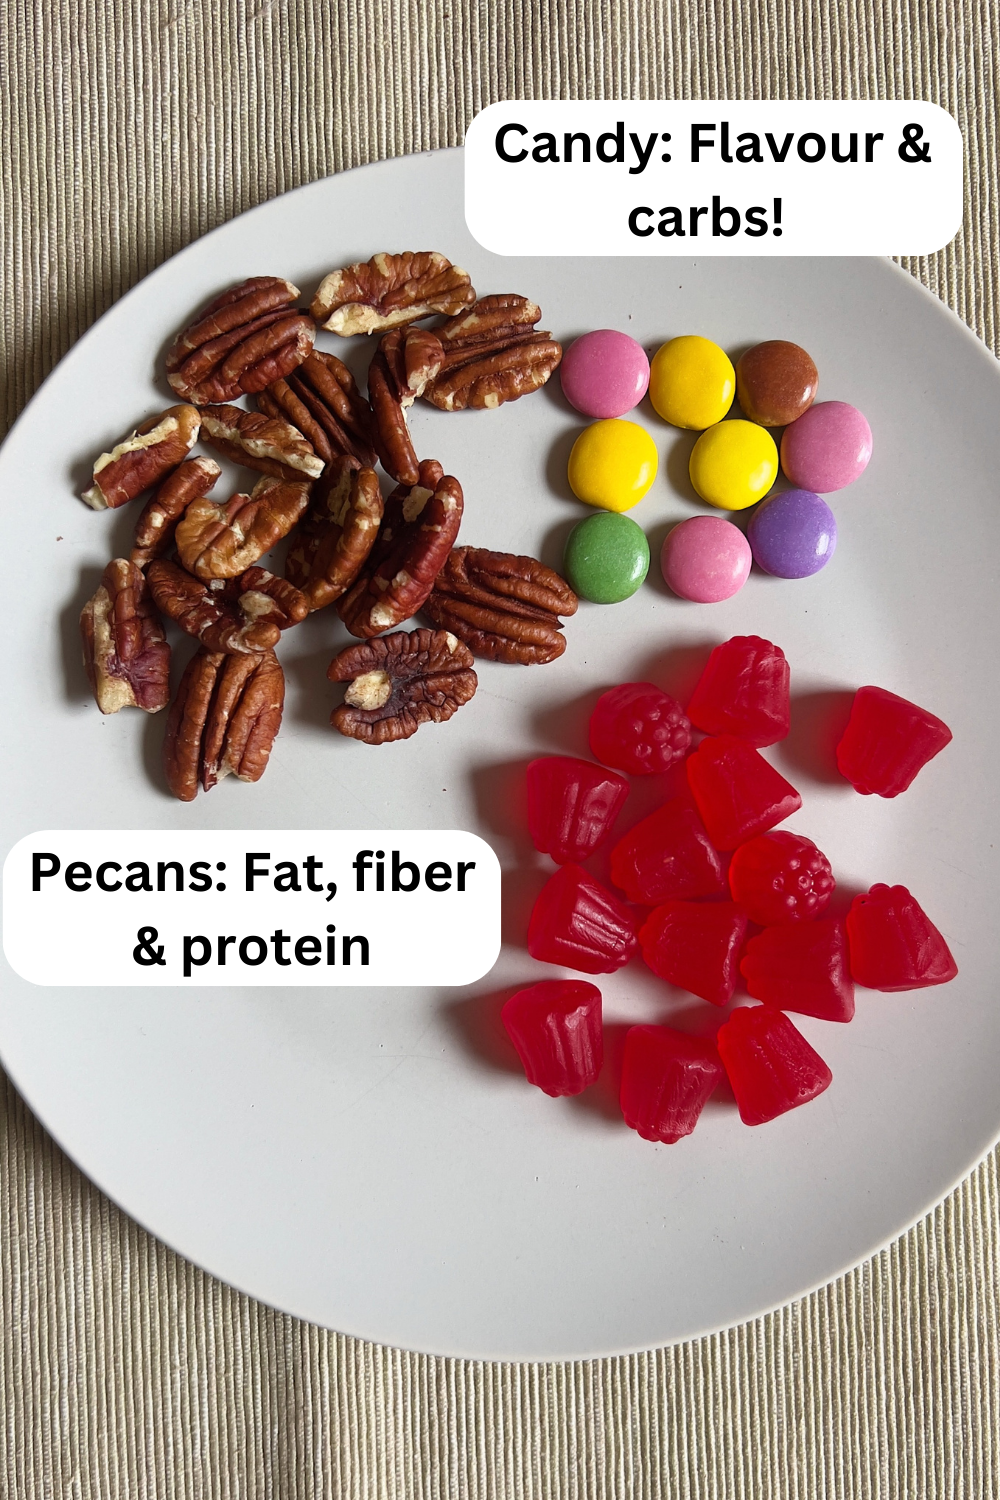 Light blue plate with smarties and swedish berries on it, with the text Candy: Flavor and carbs and Pecans: fat, fiber and protein